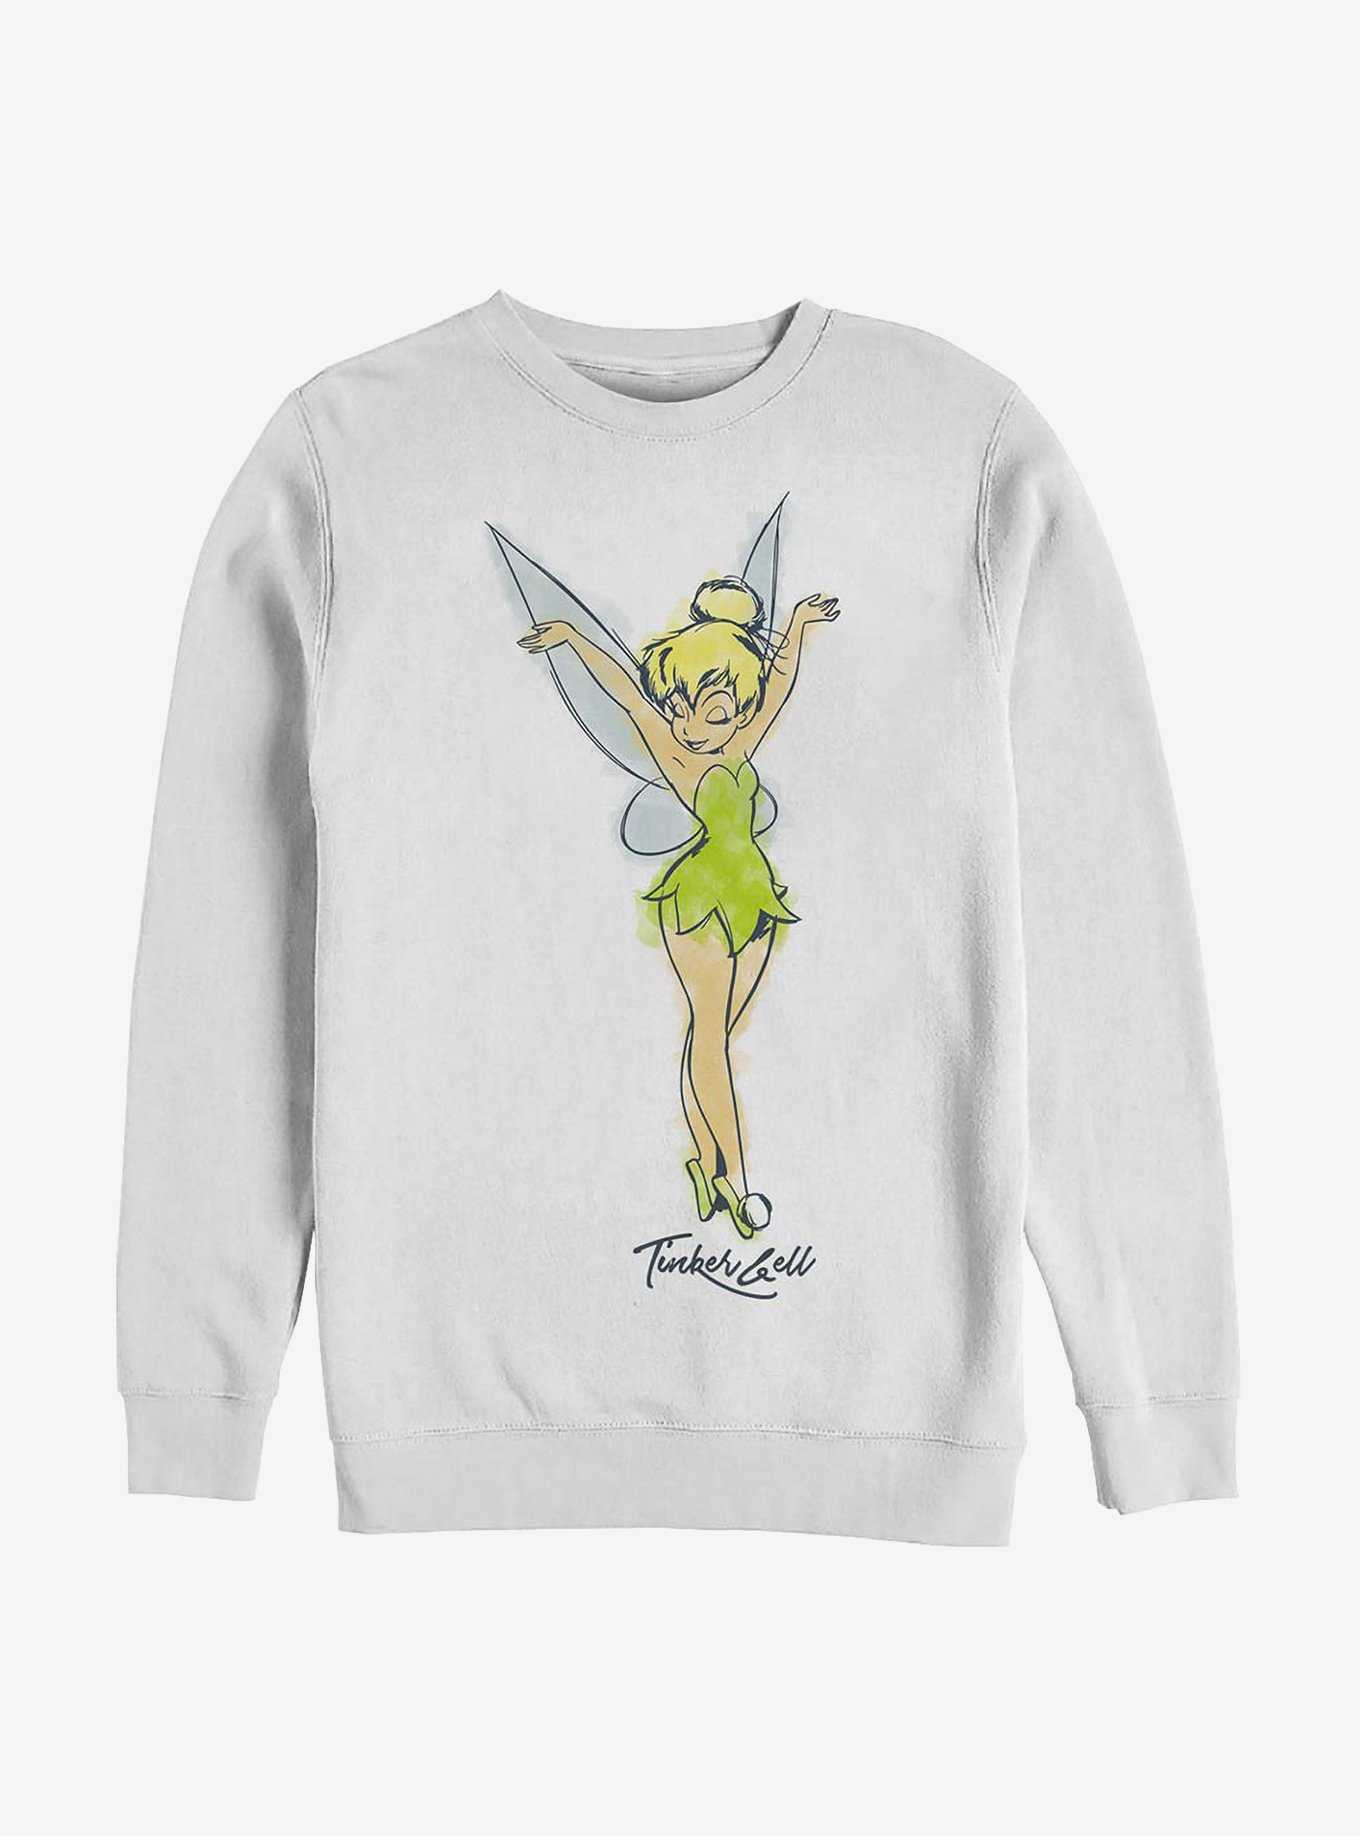 OFFICIAL Peter Pan Merchandise, | More Topic Shirts & Hot